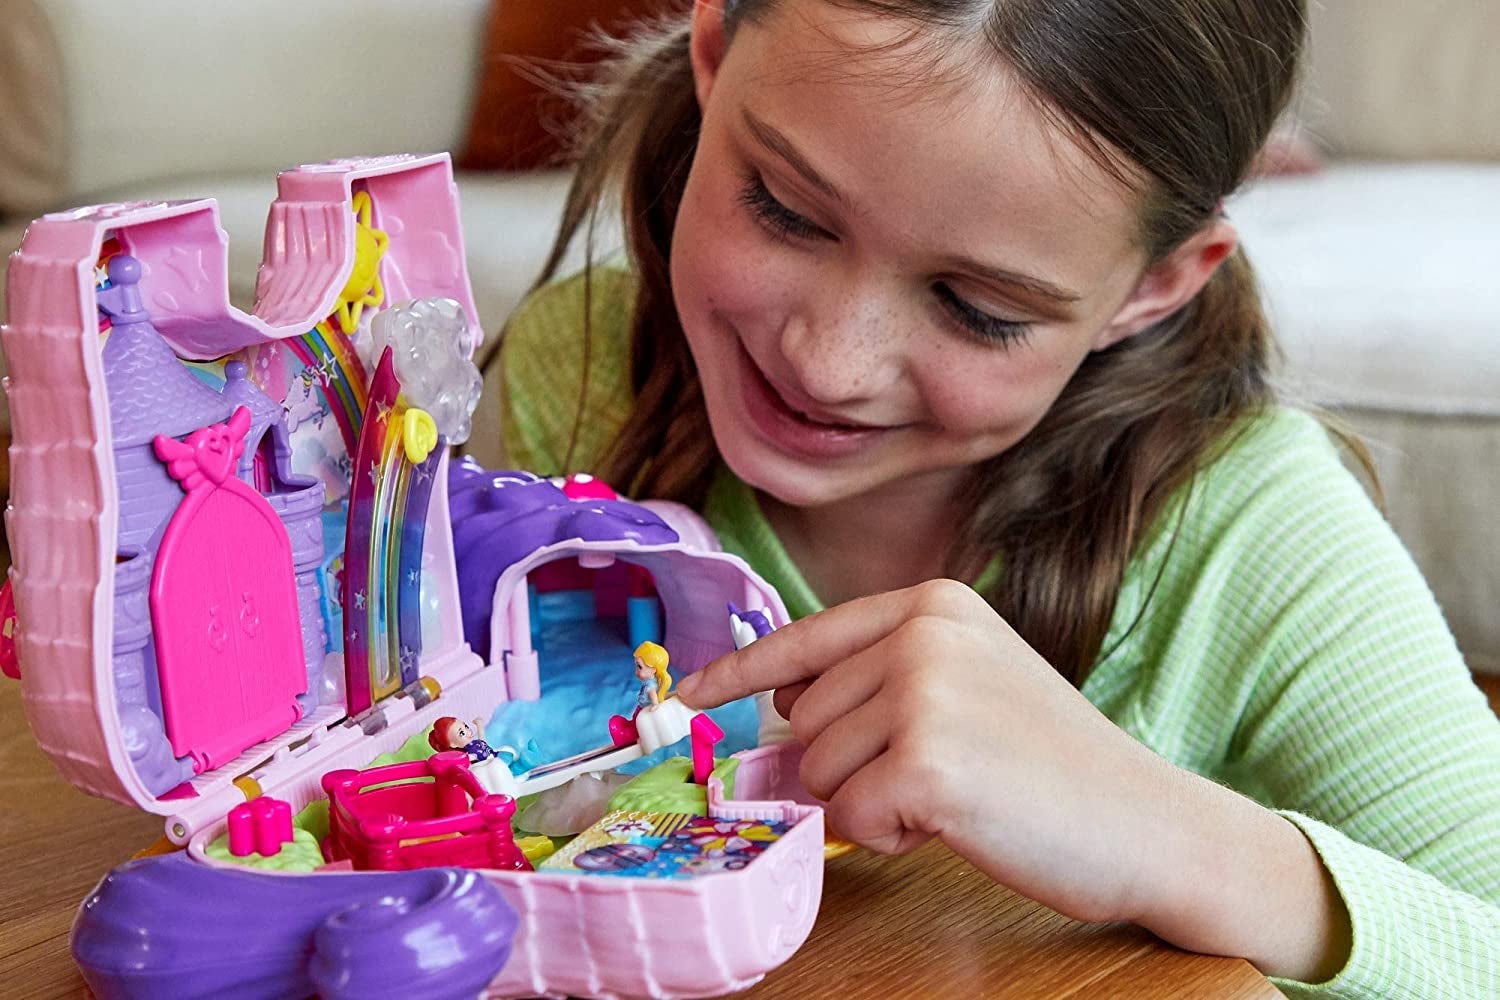 Child model playing with pink and purple plastic unicorn play set